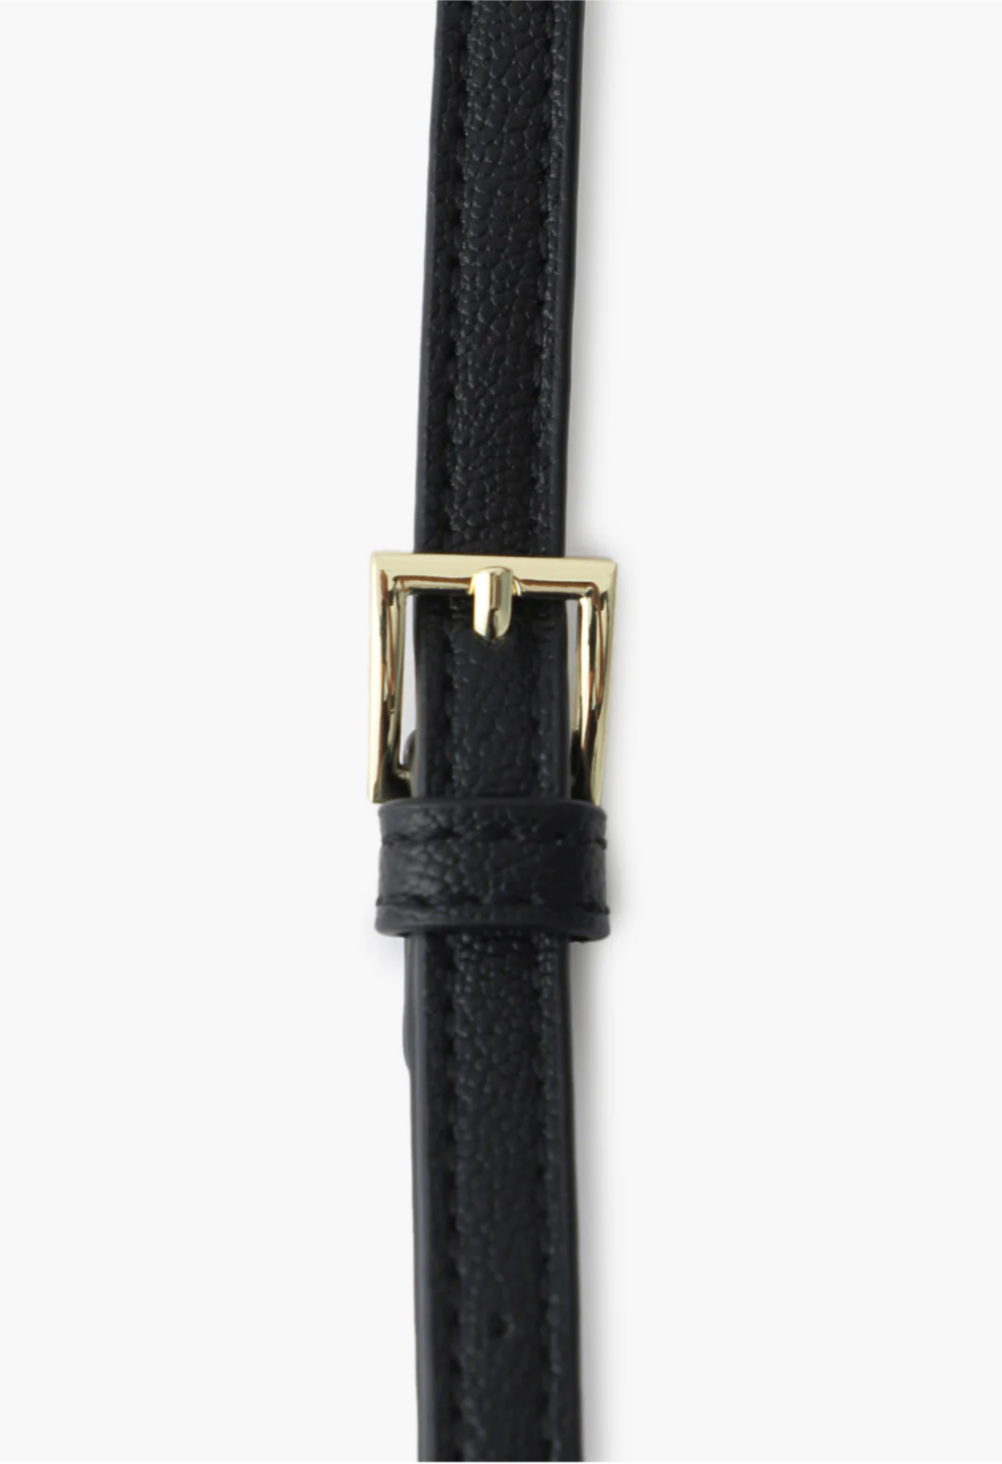 The strap to this crossbody bag is with a golden metal buckle for adjustment